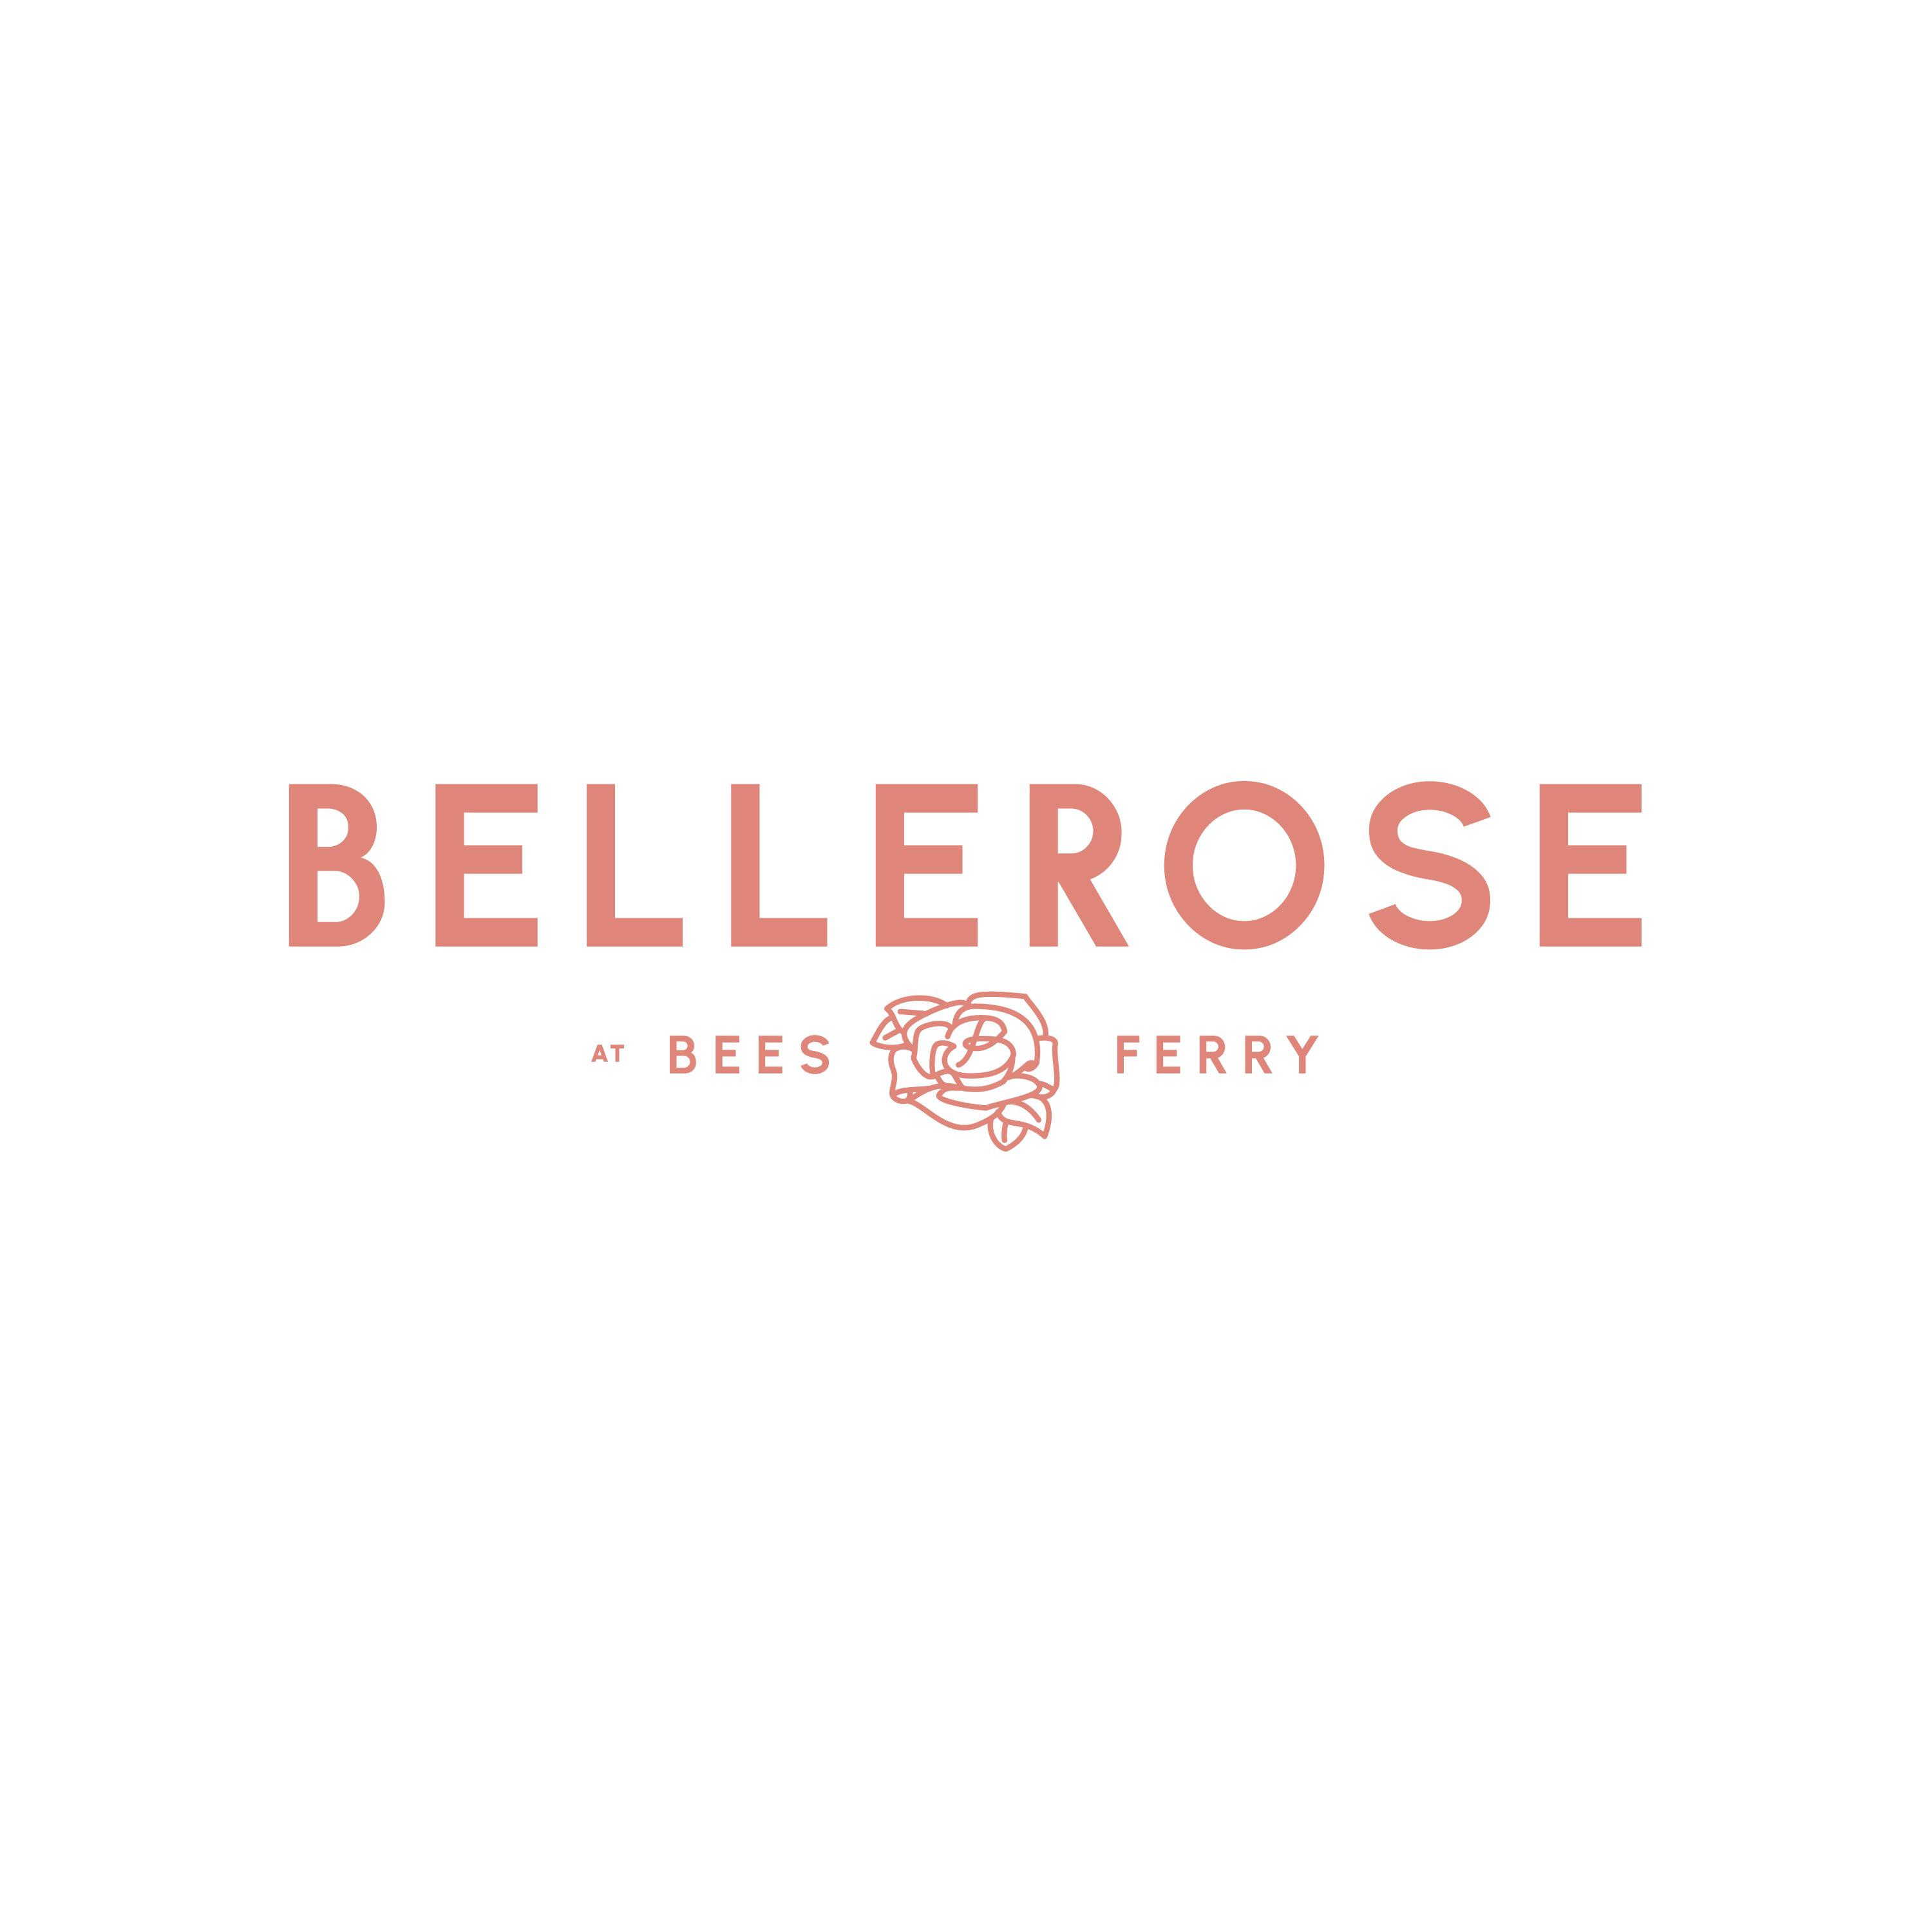 Bellerose at Bees Ferry